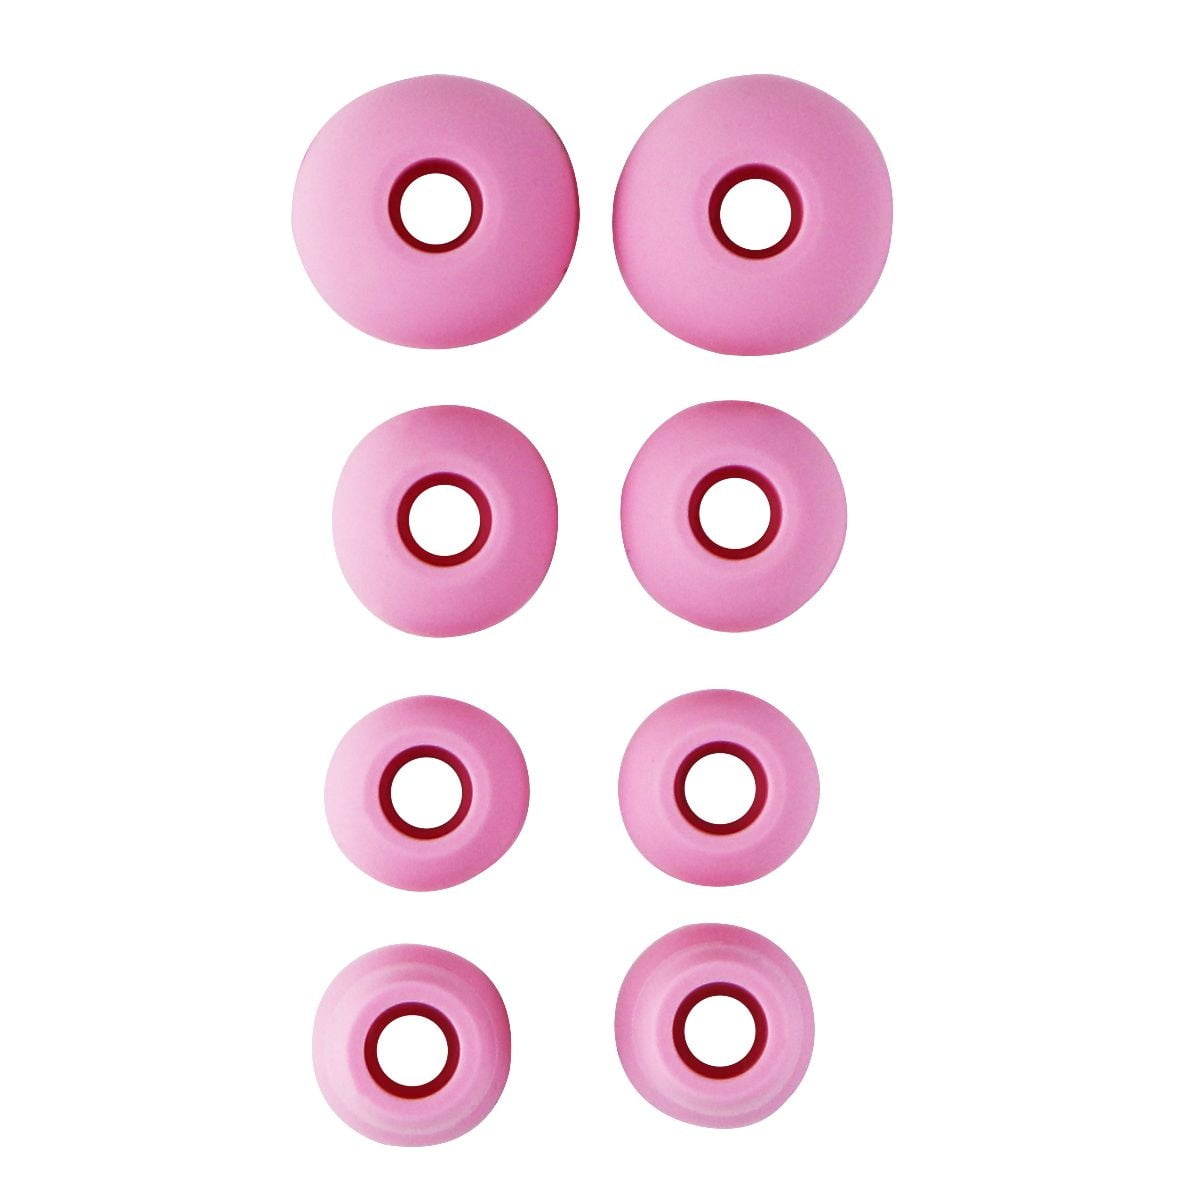 Replacement Silicone Ear Gels/Ear Tips - Pink (Used)